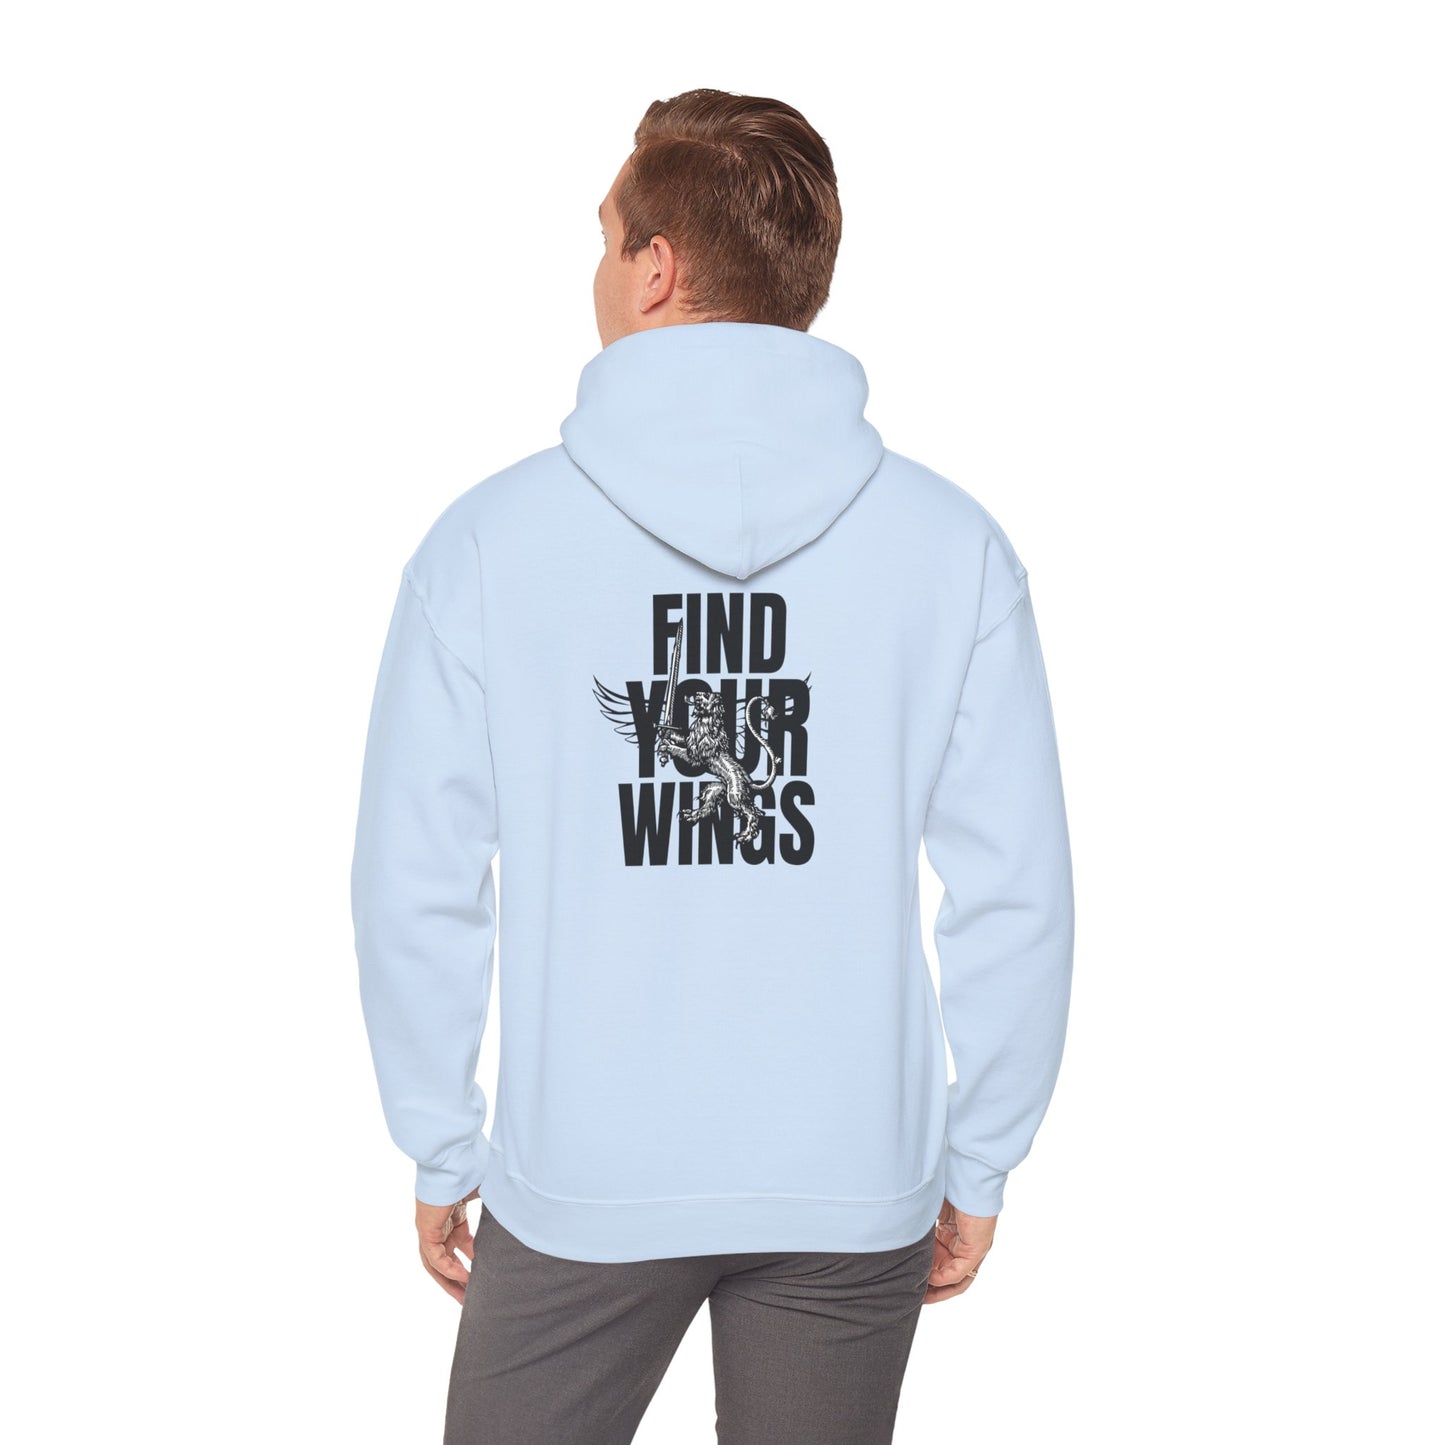 "Find Your Wings" Graphic Hoodie